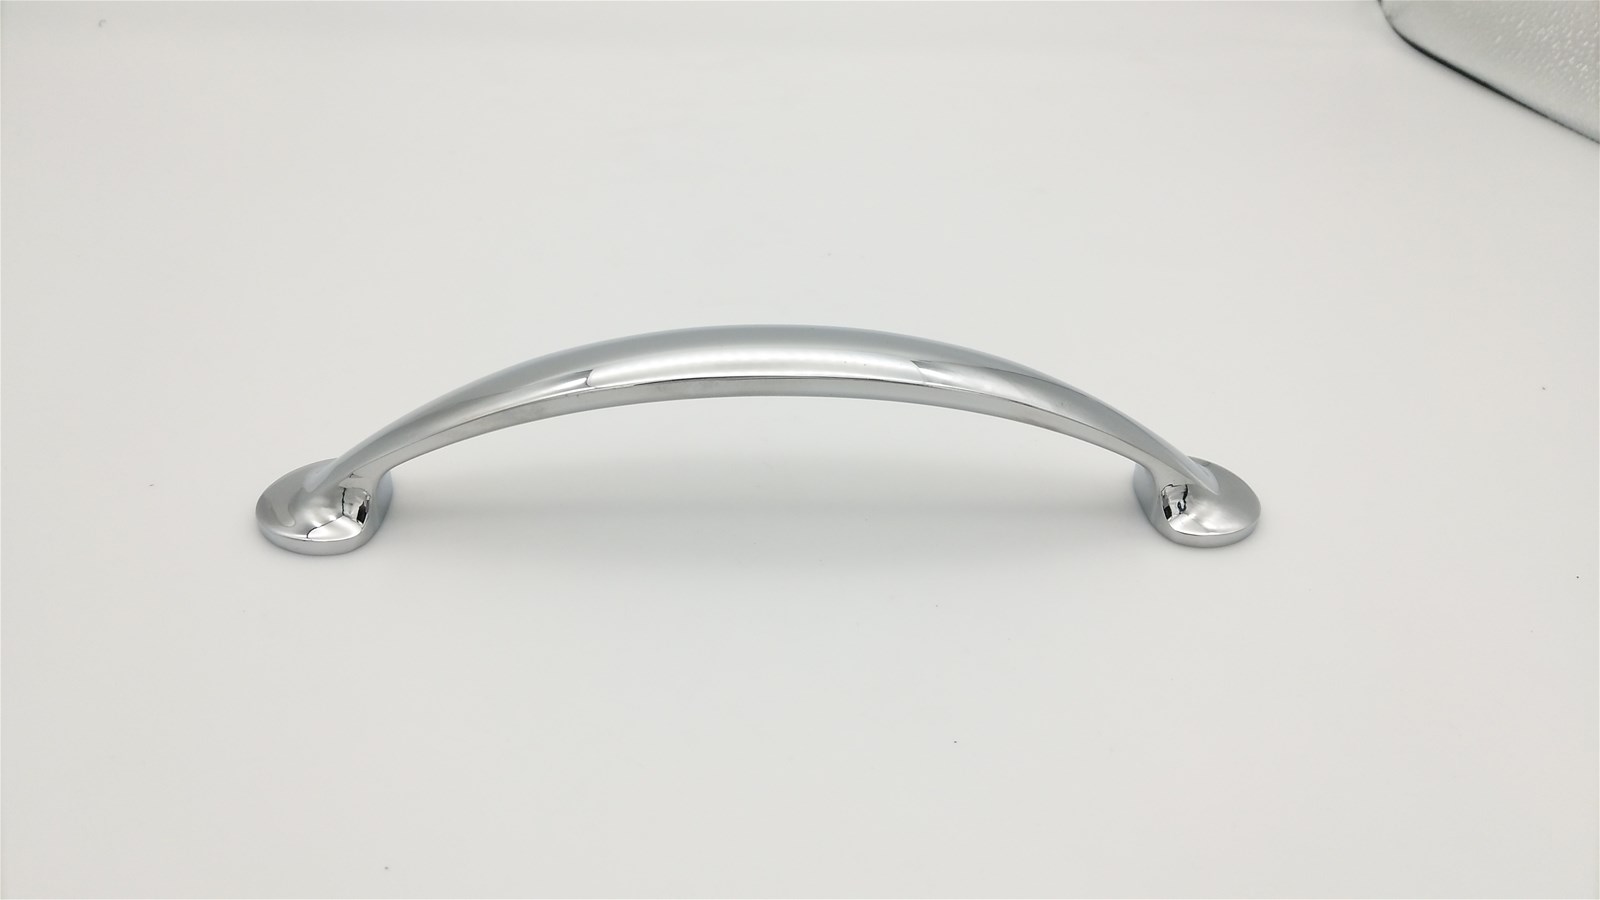 Door and window handles die casting available in various sizes colors and materials